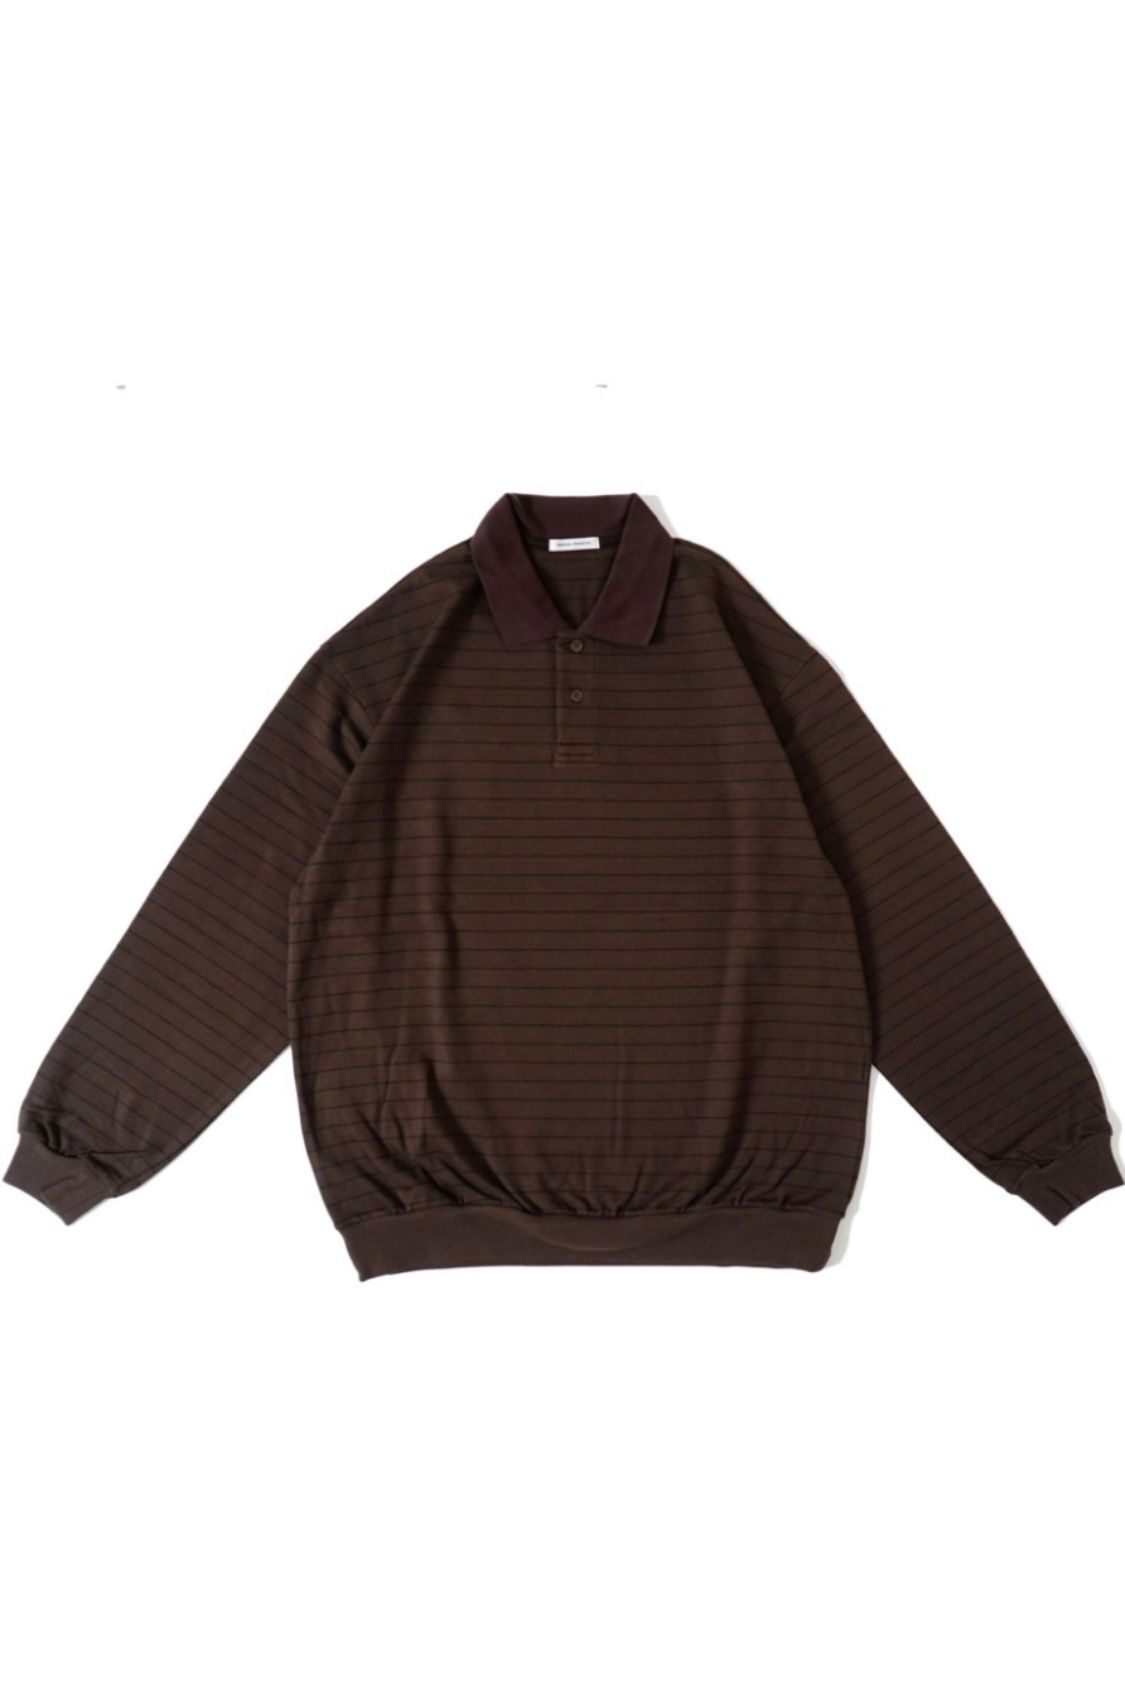 UNIVERSAL PRODUCTS. BORDER L/S POLO 【2022新春福袋】 www.mehle